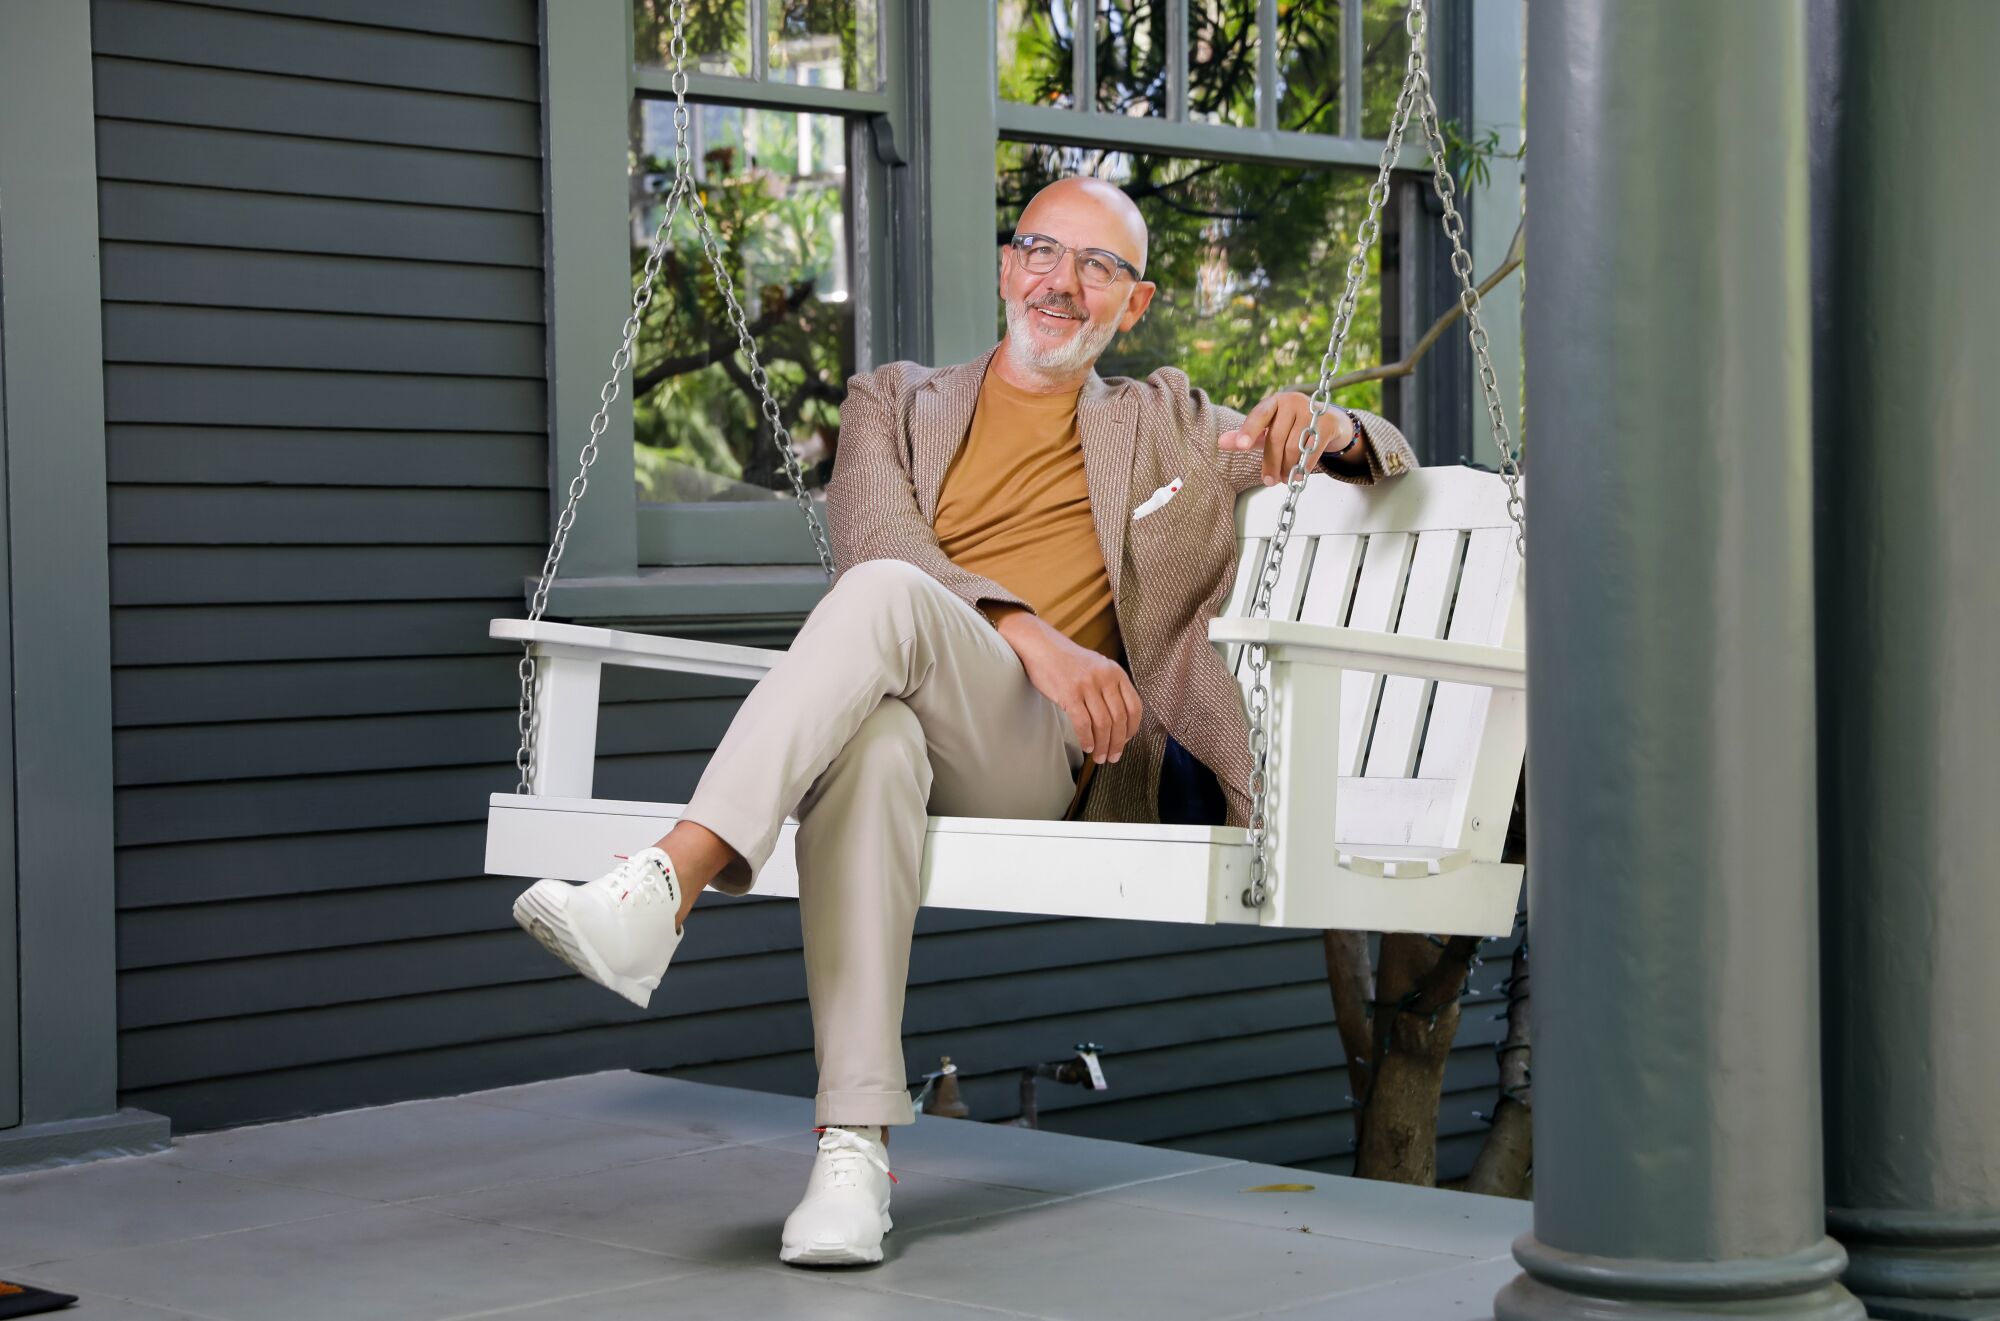 A man sits, legs crossed, on a white porch swing.